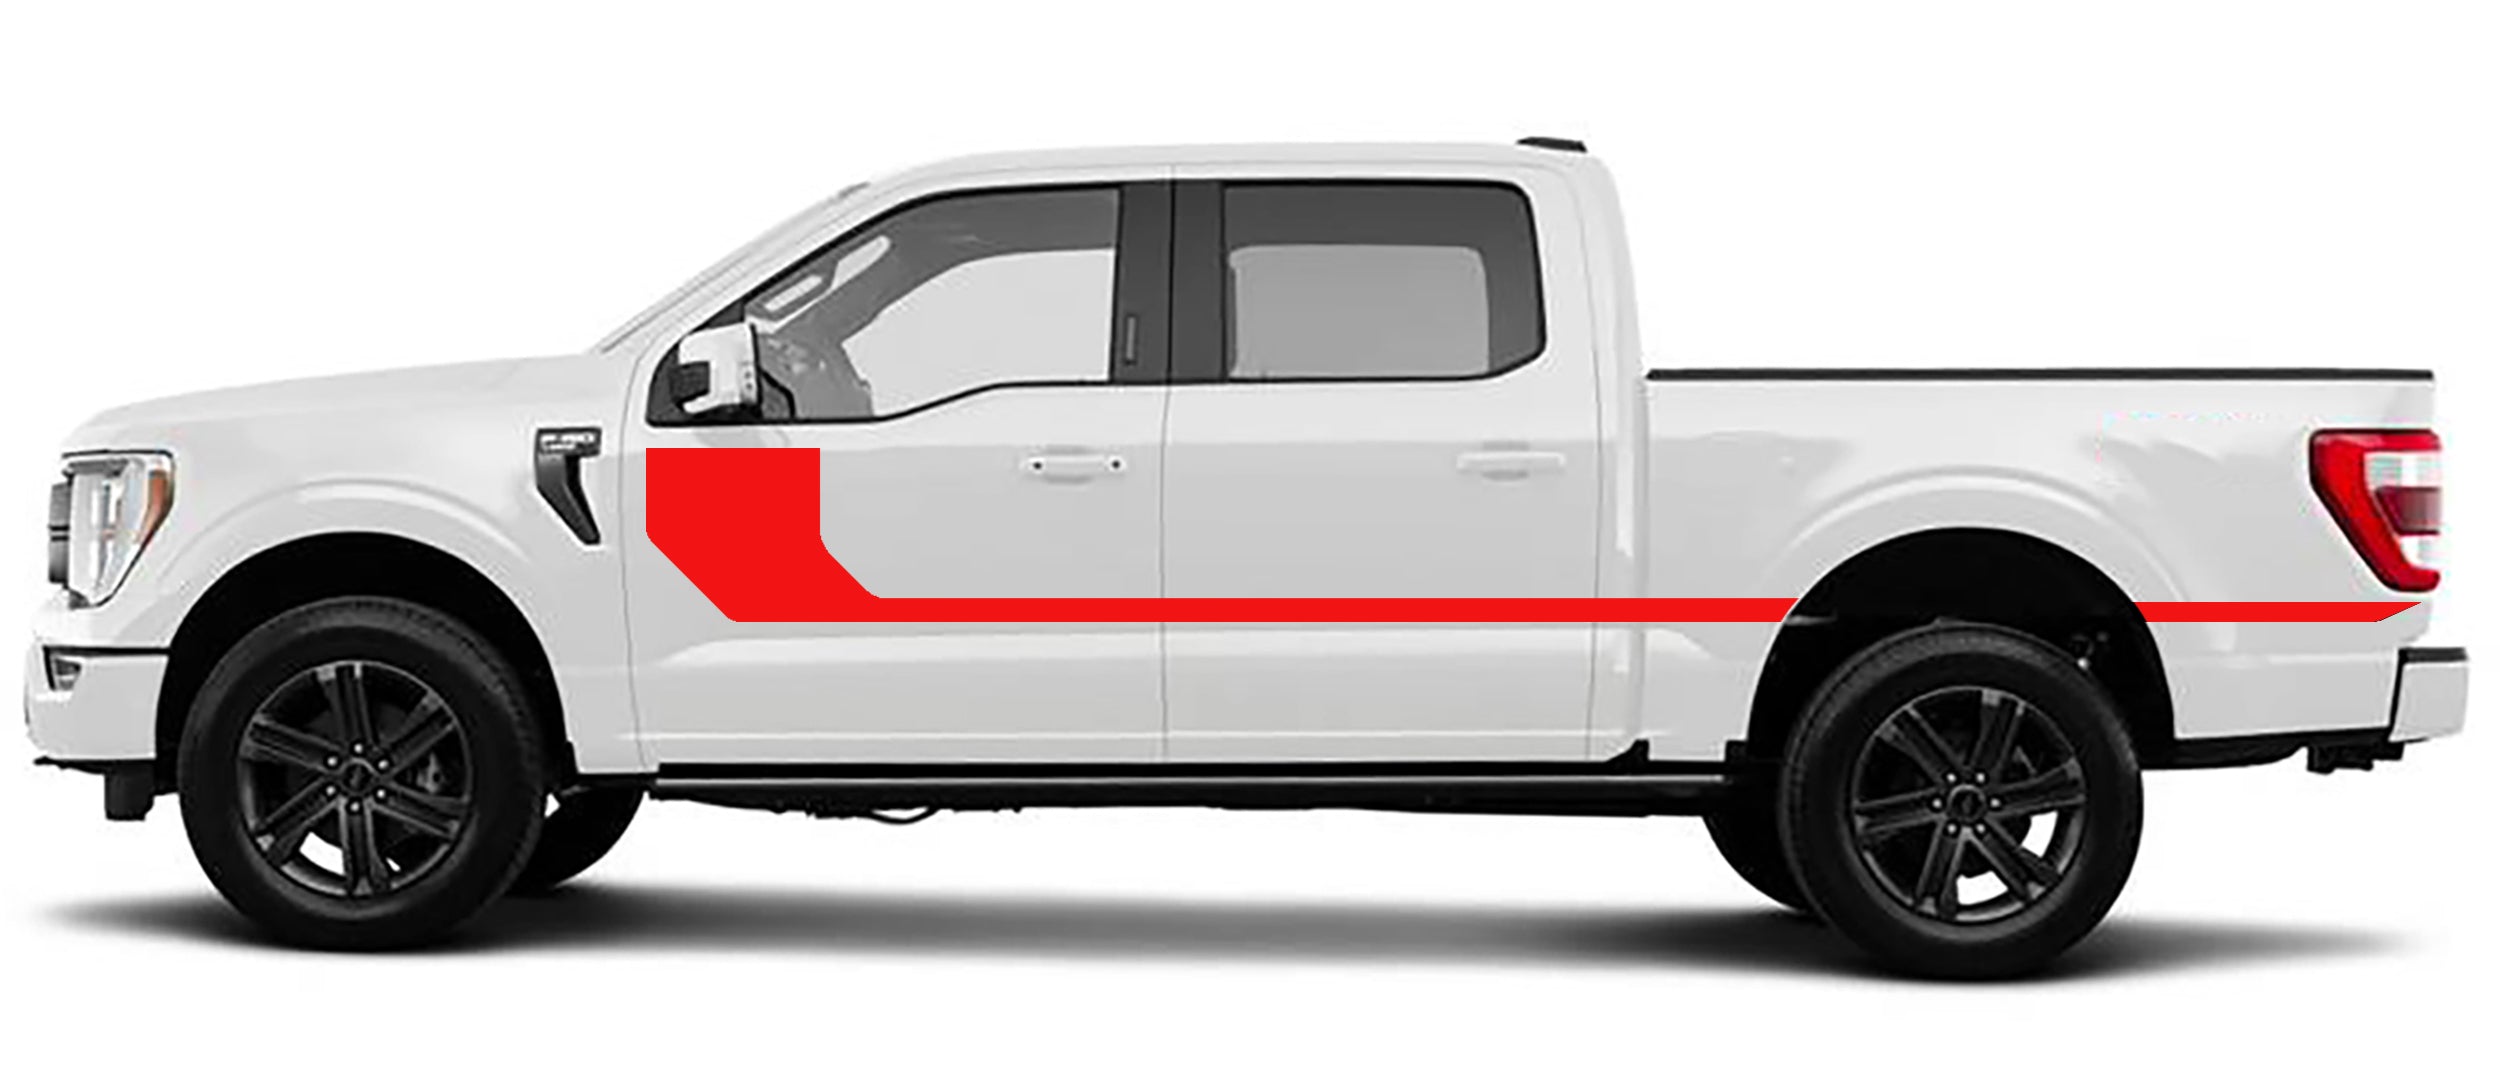 Rally hocky upper door side graphics for ford f 150 2021 to 2023 models red